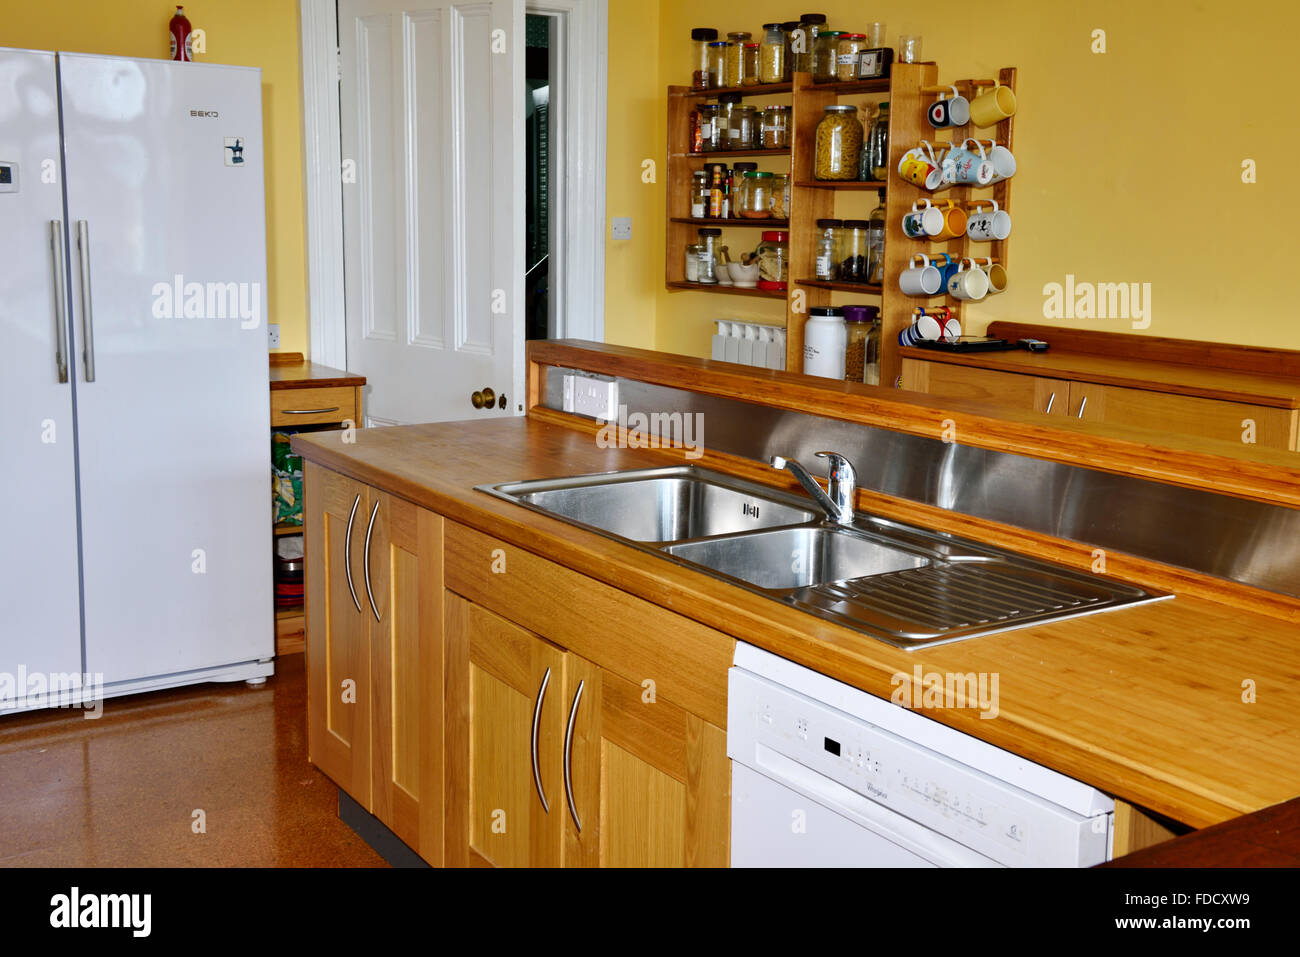 Refurbished kitchen with stainless steel sink in bamboo counter top, England Stock Photo